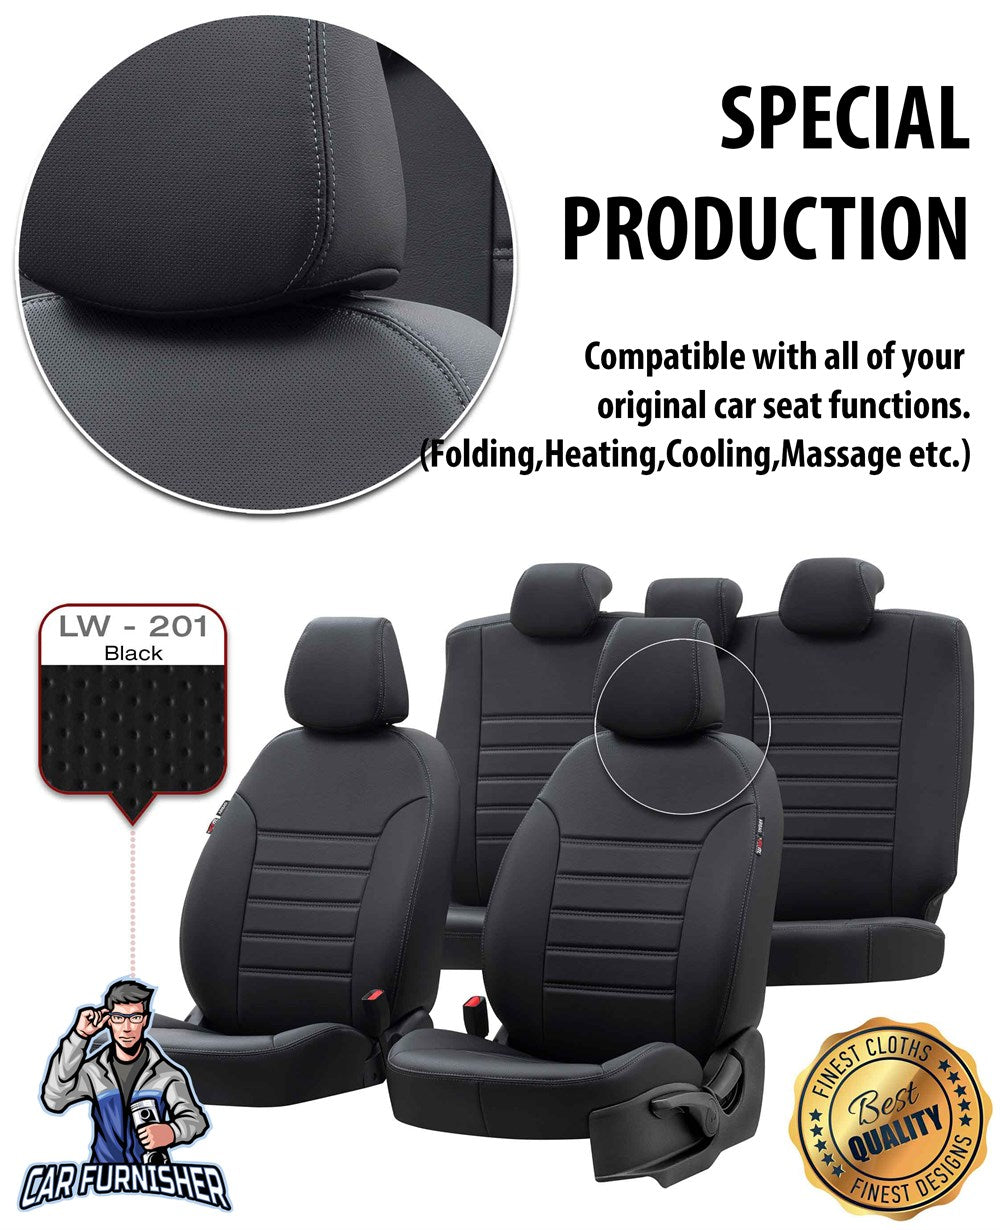 Peugeot 407 Seat Covers Istanbul Leather Design Black Leather